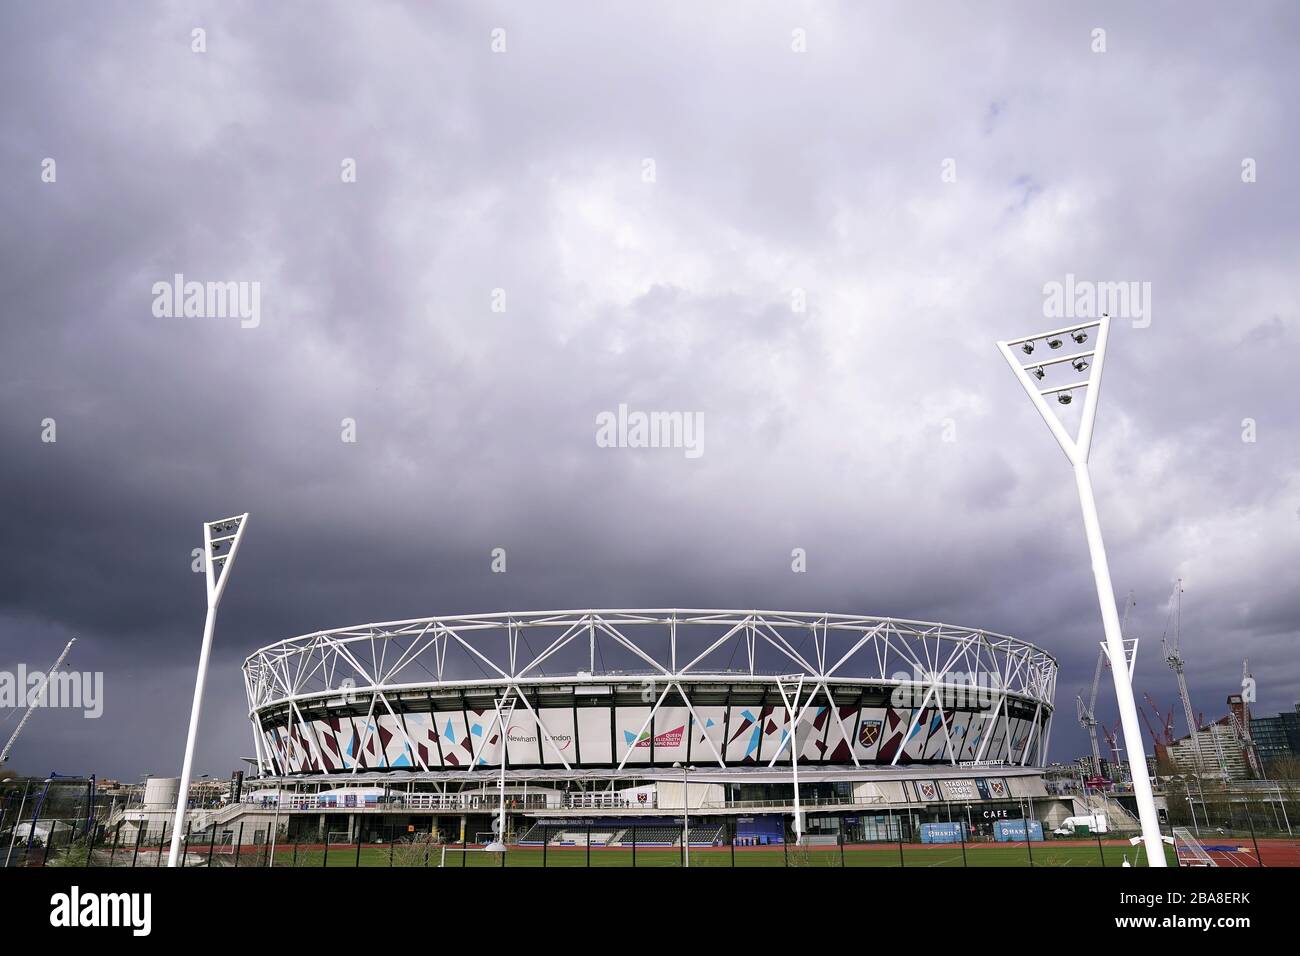 General view of the London Stadium before the game as grey clouds form overhead Stock Photo